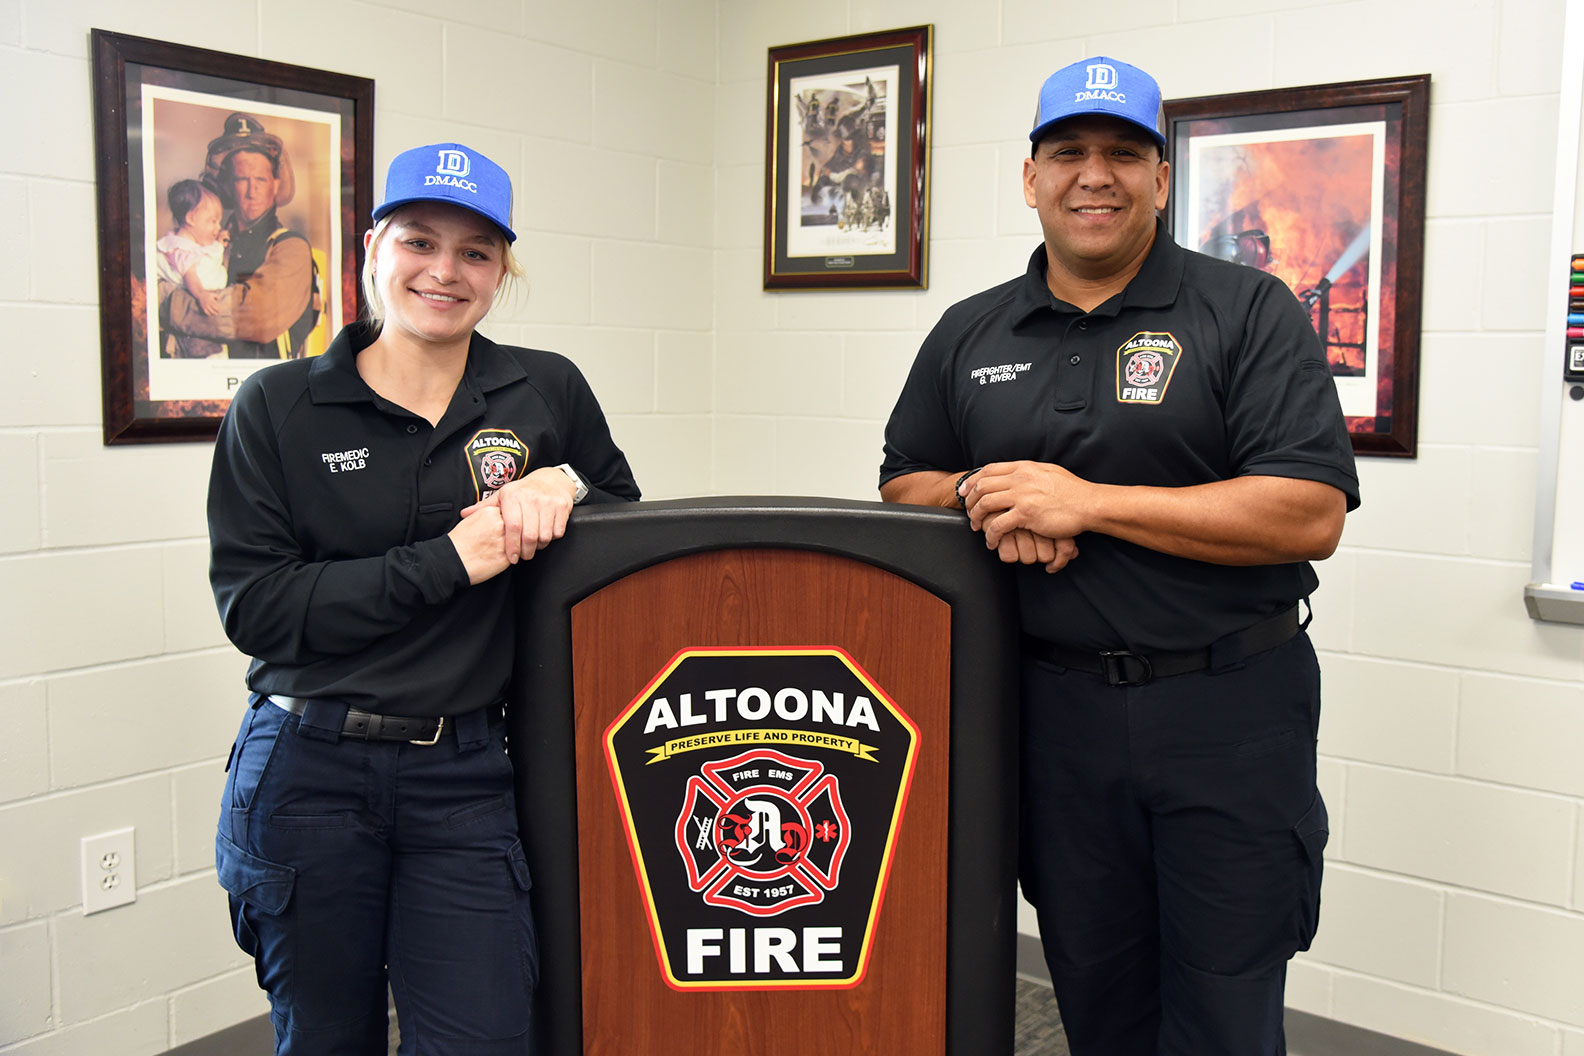 Kolb (above, left), an August 2023 graduate of the DMACC Paramedic certificate program, and her​ Altoona Fire Department colleague Gabriel Rivera (right), a 2016 DMACC Emergency Medical Technician (EMT) program alum, are all smiles while sporting new DMACC hats on Nov. 1 at the Altoona Fire Department.